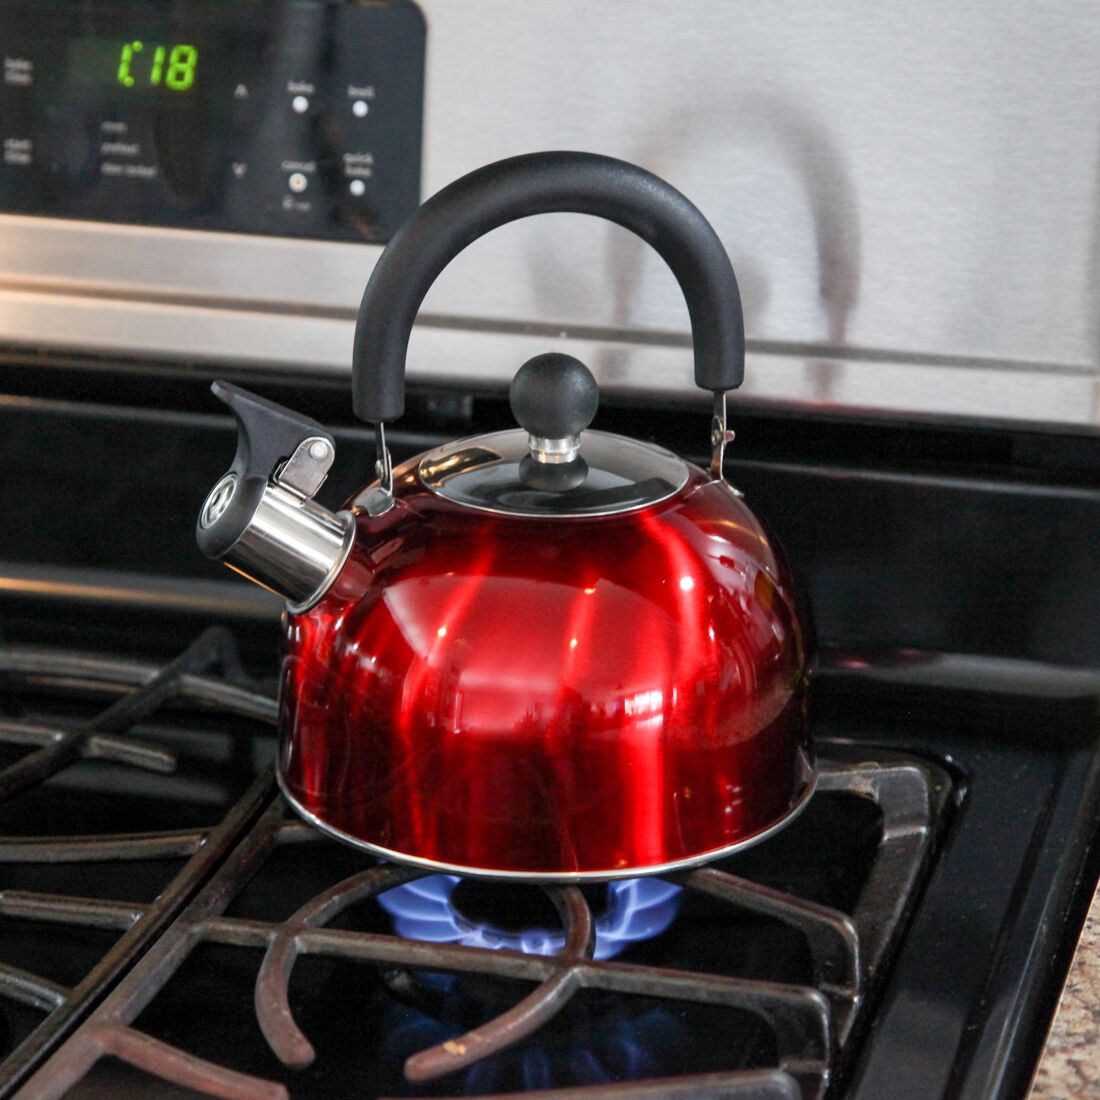 Supreme Housewares Stainless Steel Whistling Stovetop Kettle Color: Red, Capacity: 2.3 qts. 71511-W